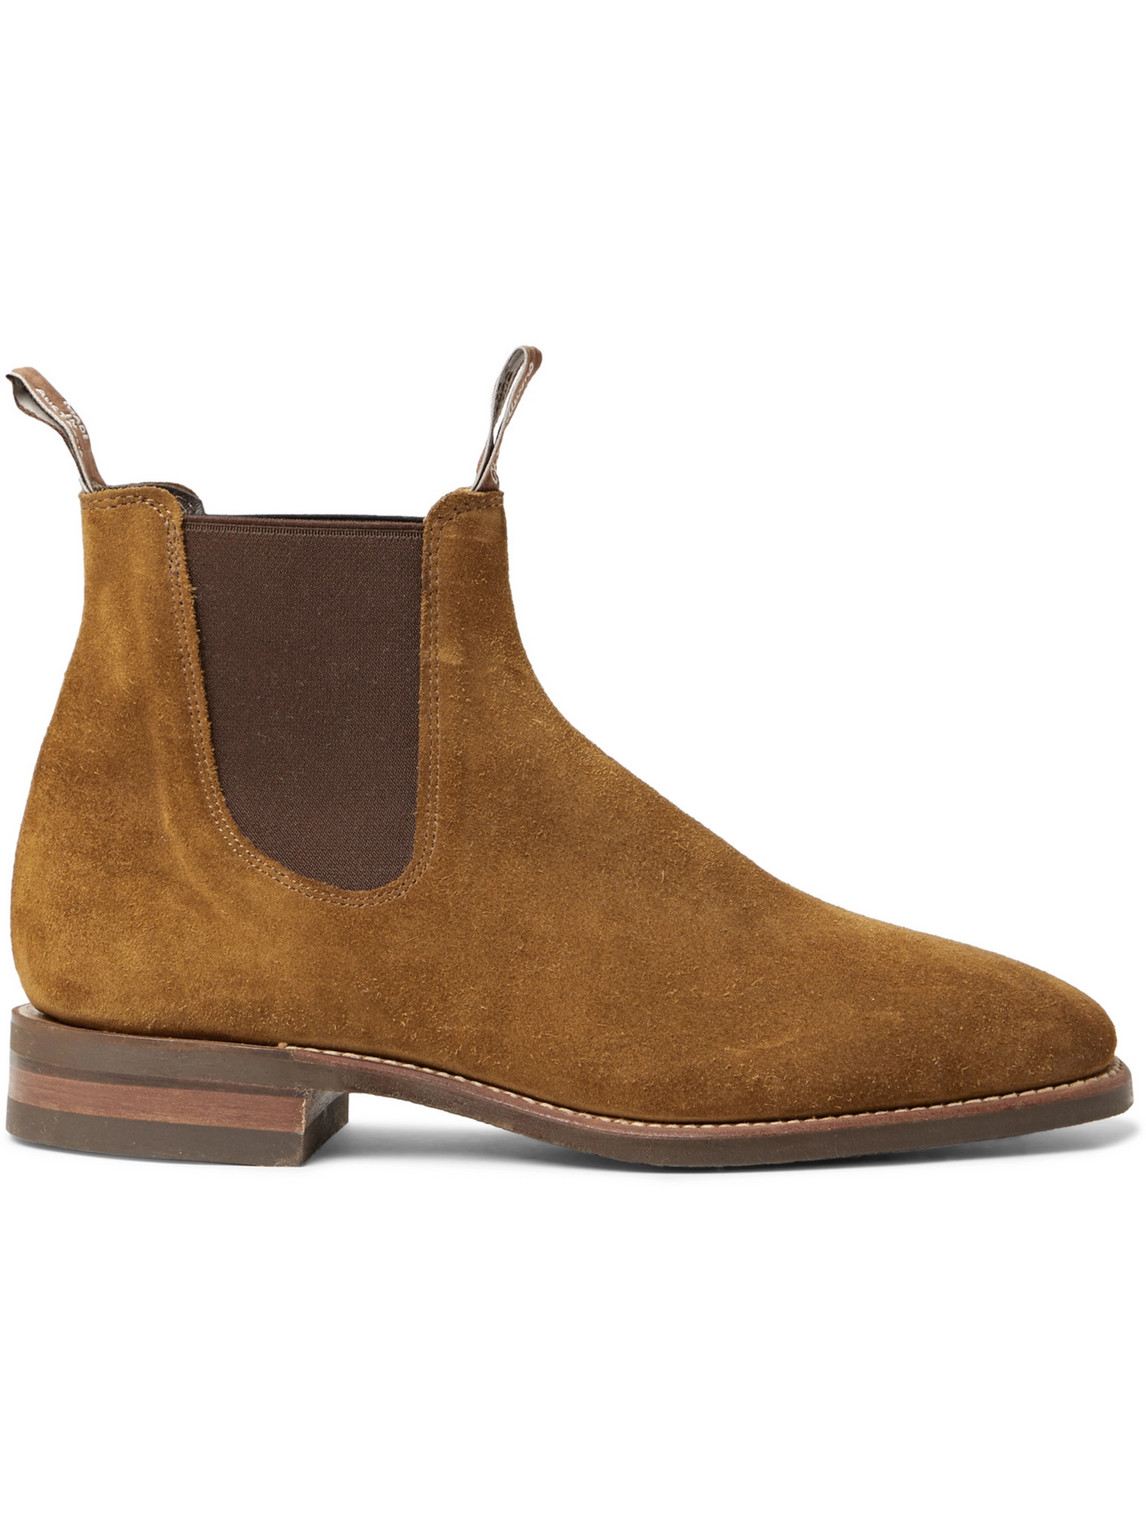 R.m.williams Comfort Craftsman Suede Chelsea Boots In Brown | ModeSens